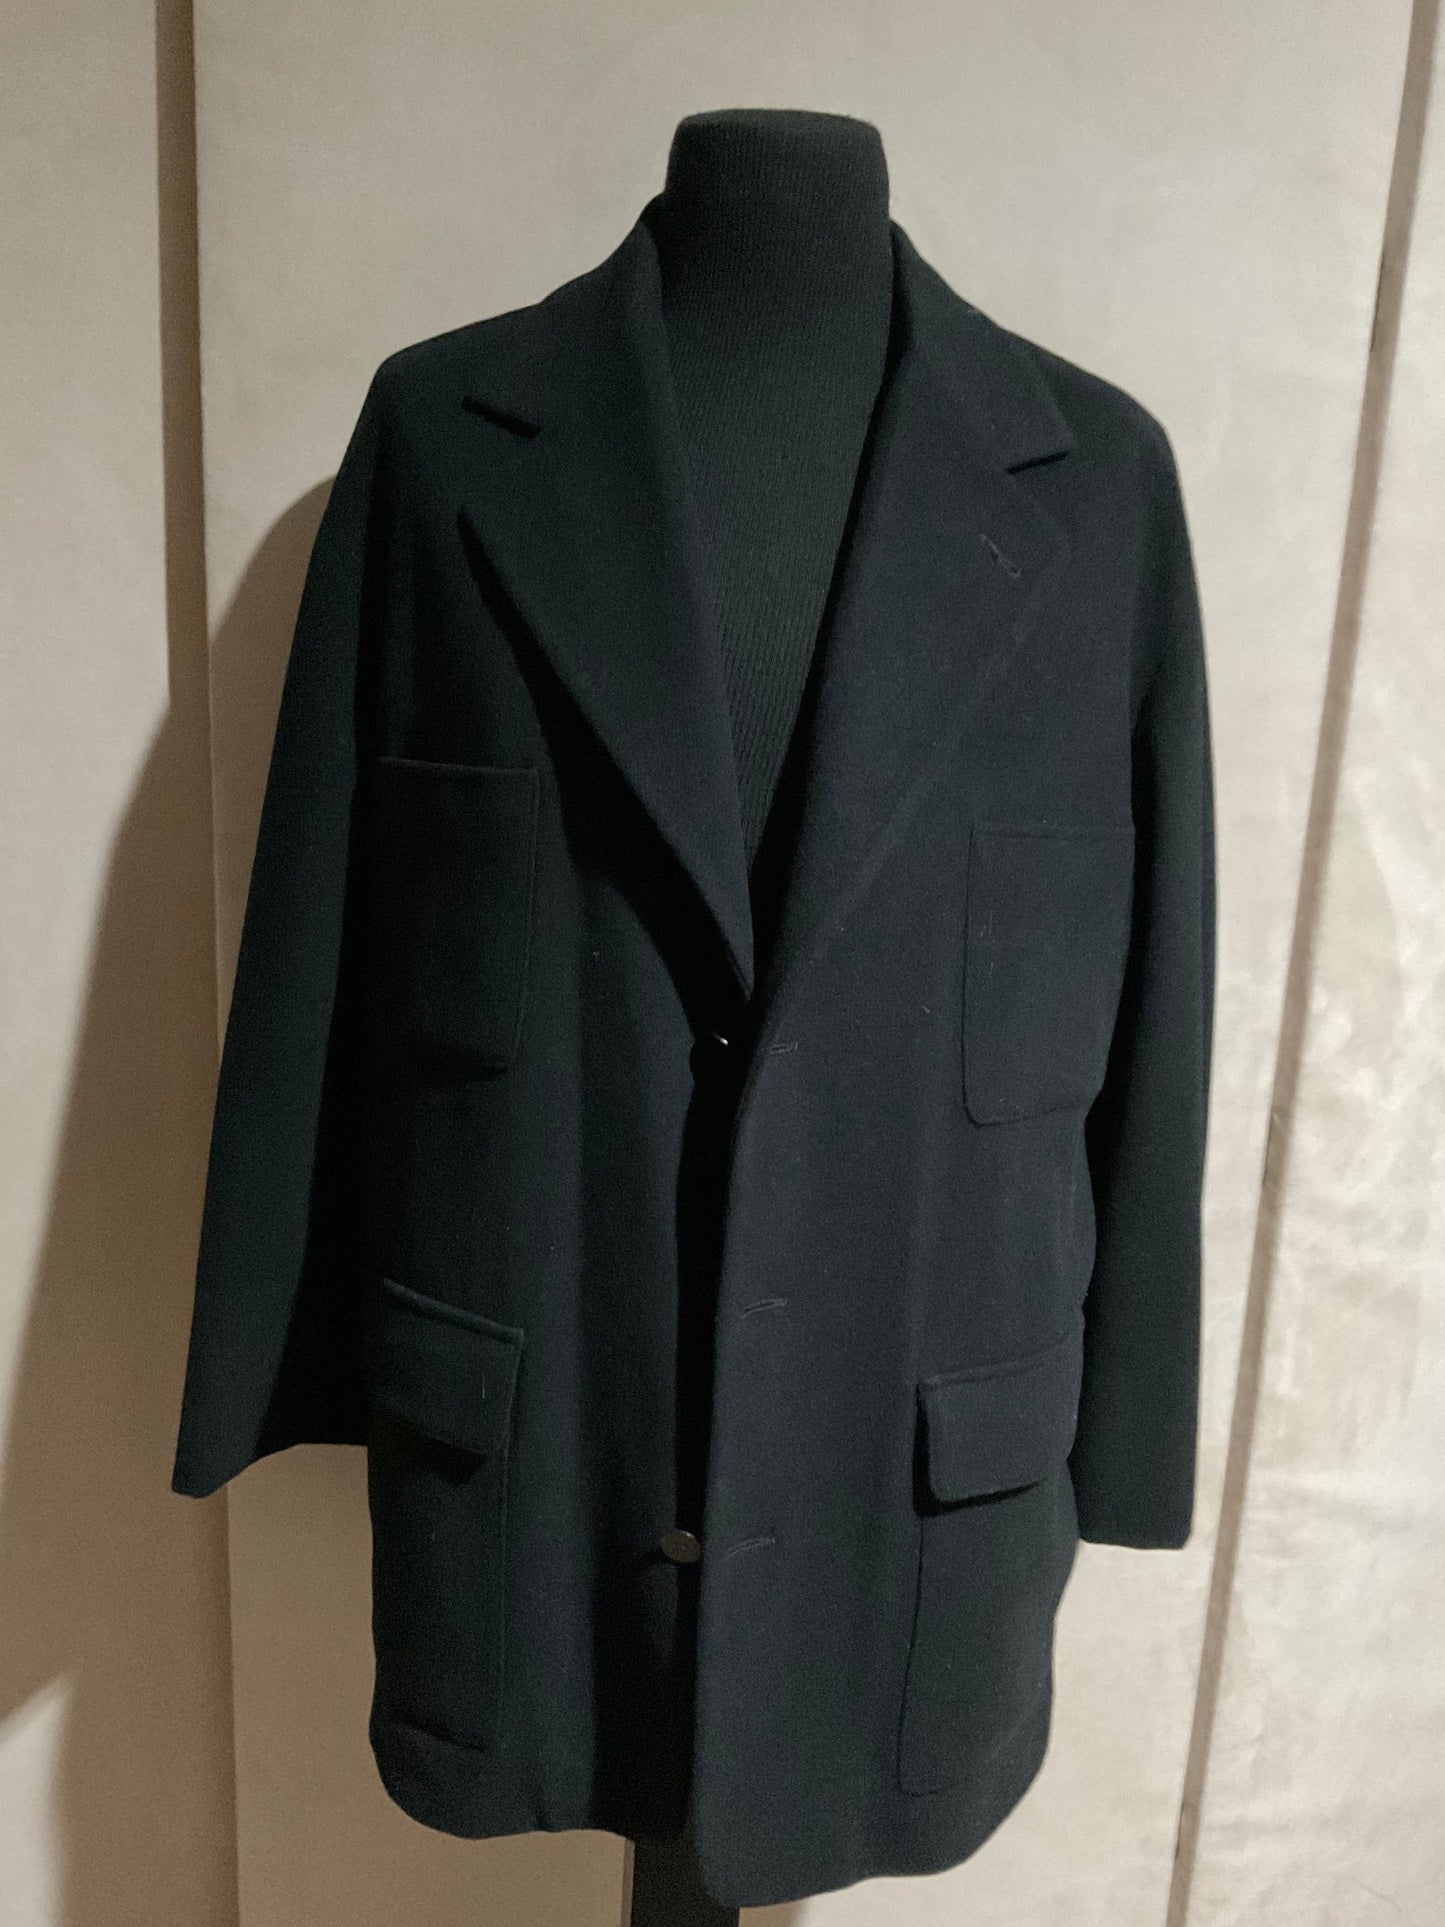 R P JACKET / OUTERWEAR / BLACK WOOL / MEDIUM - LARGE / NEW / MADE IN CANADA